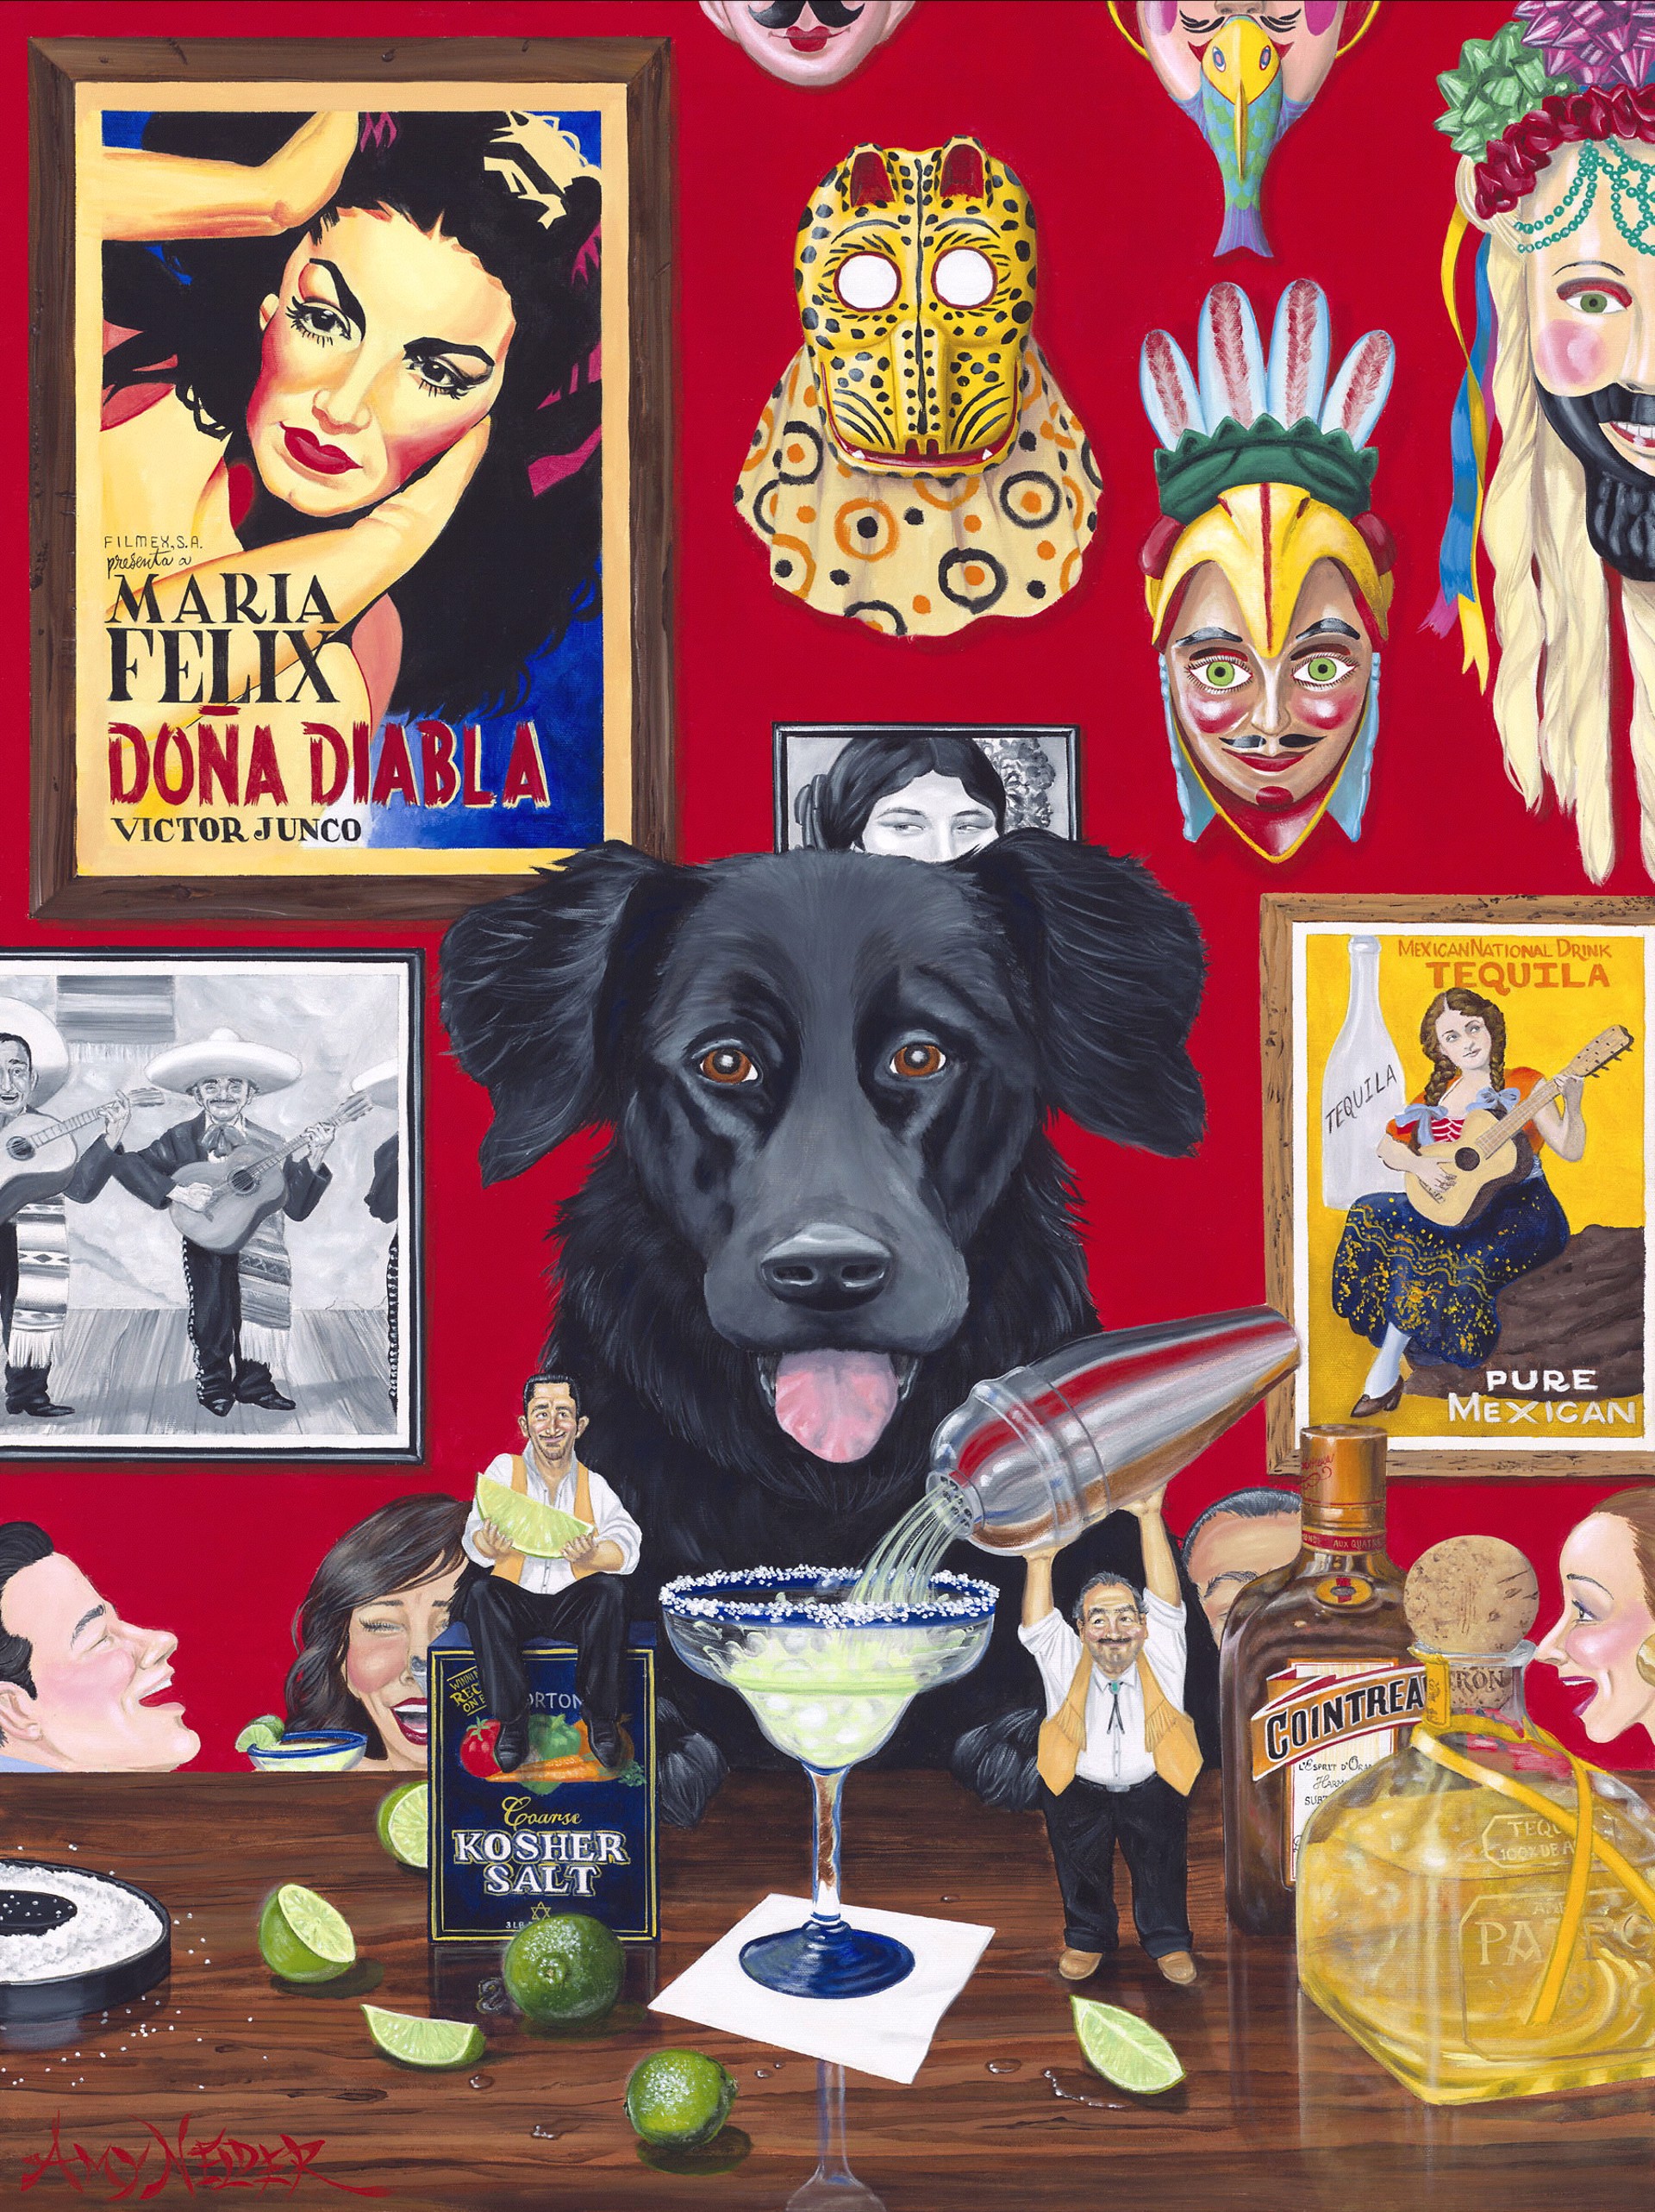 One Tequila, two tequila, three tequila, WOOF! by Amy Nelder